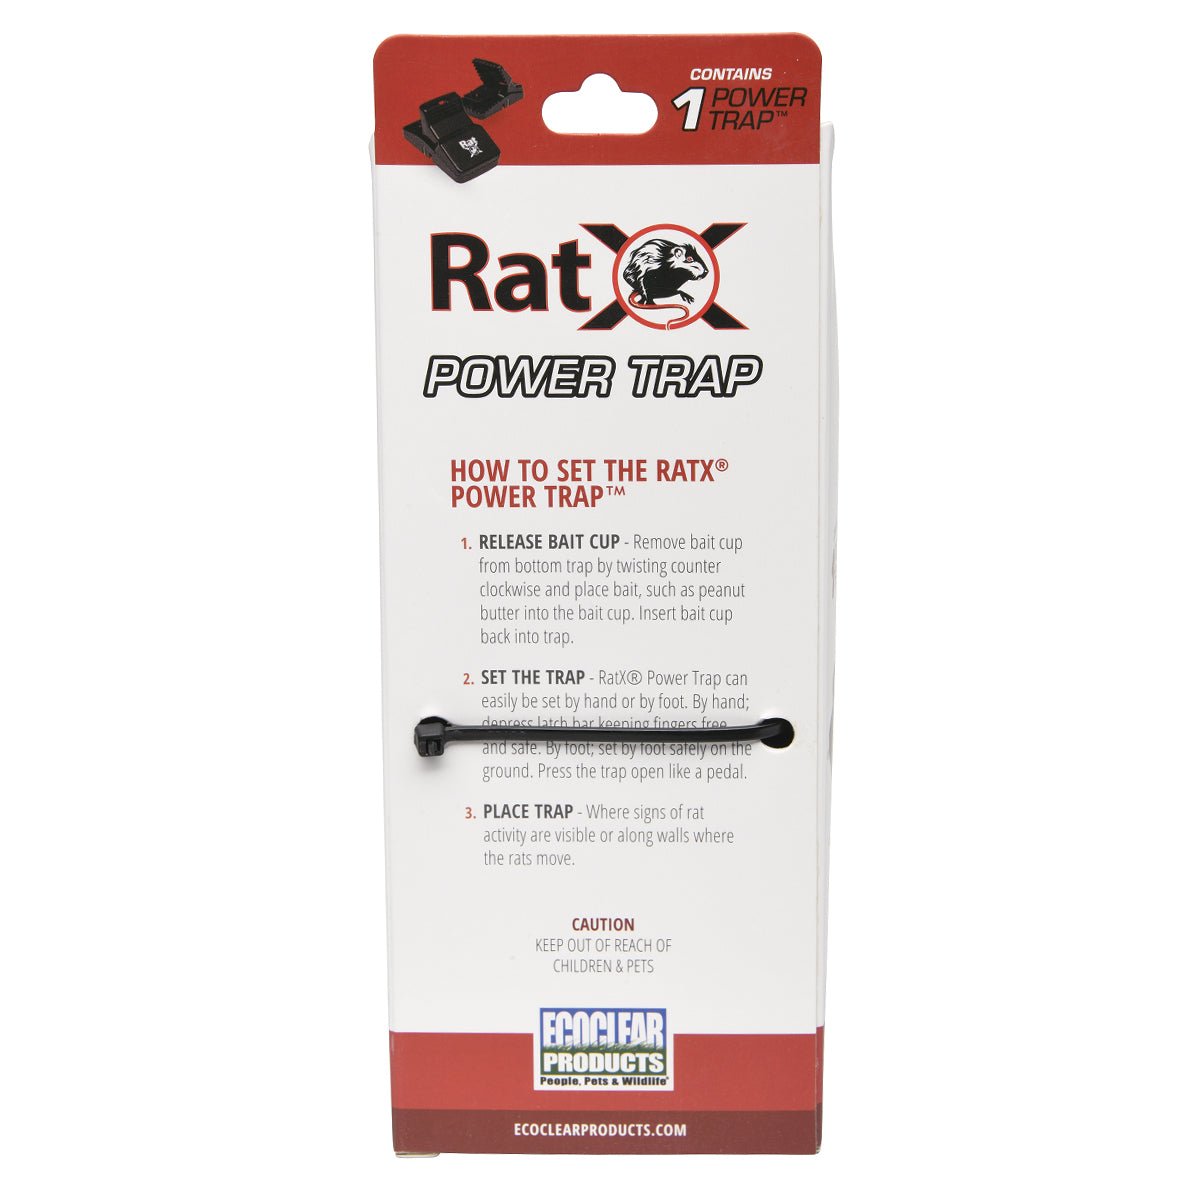 RatX® Power Trap back packaging